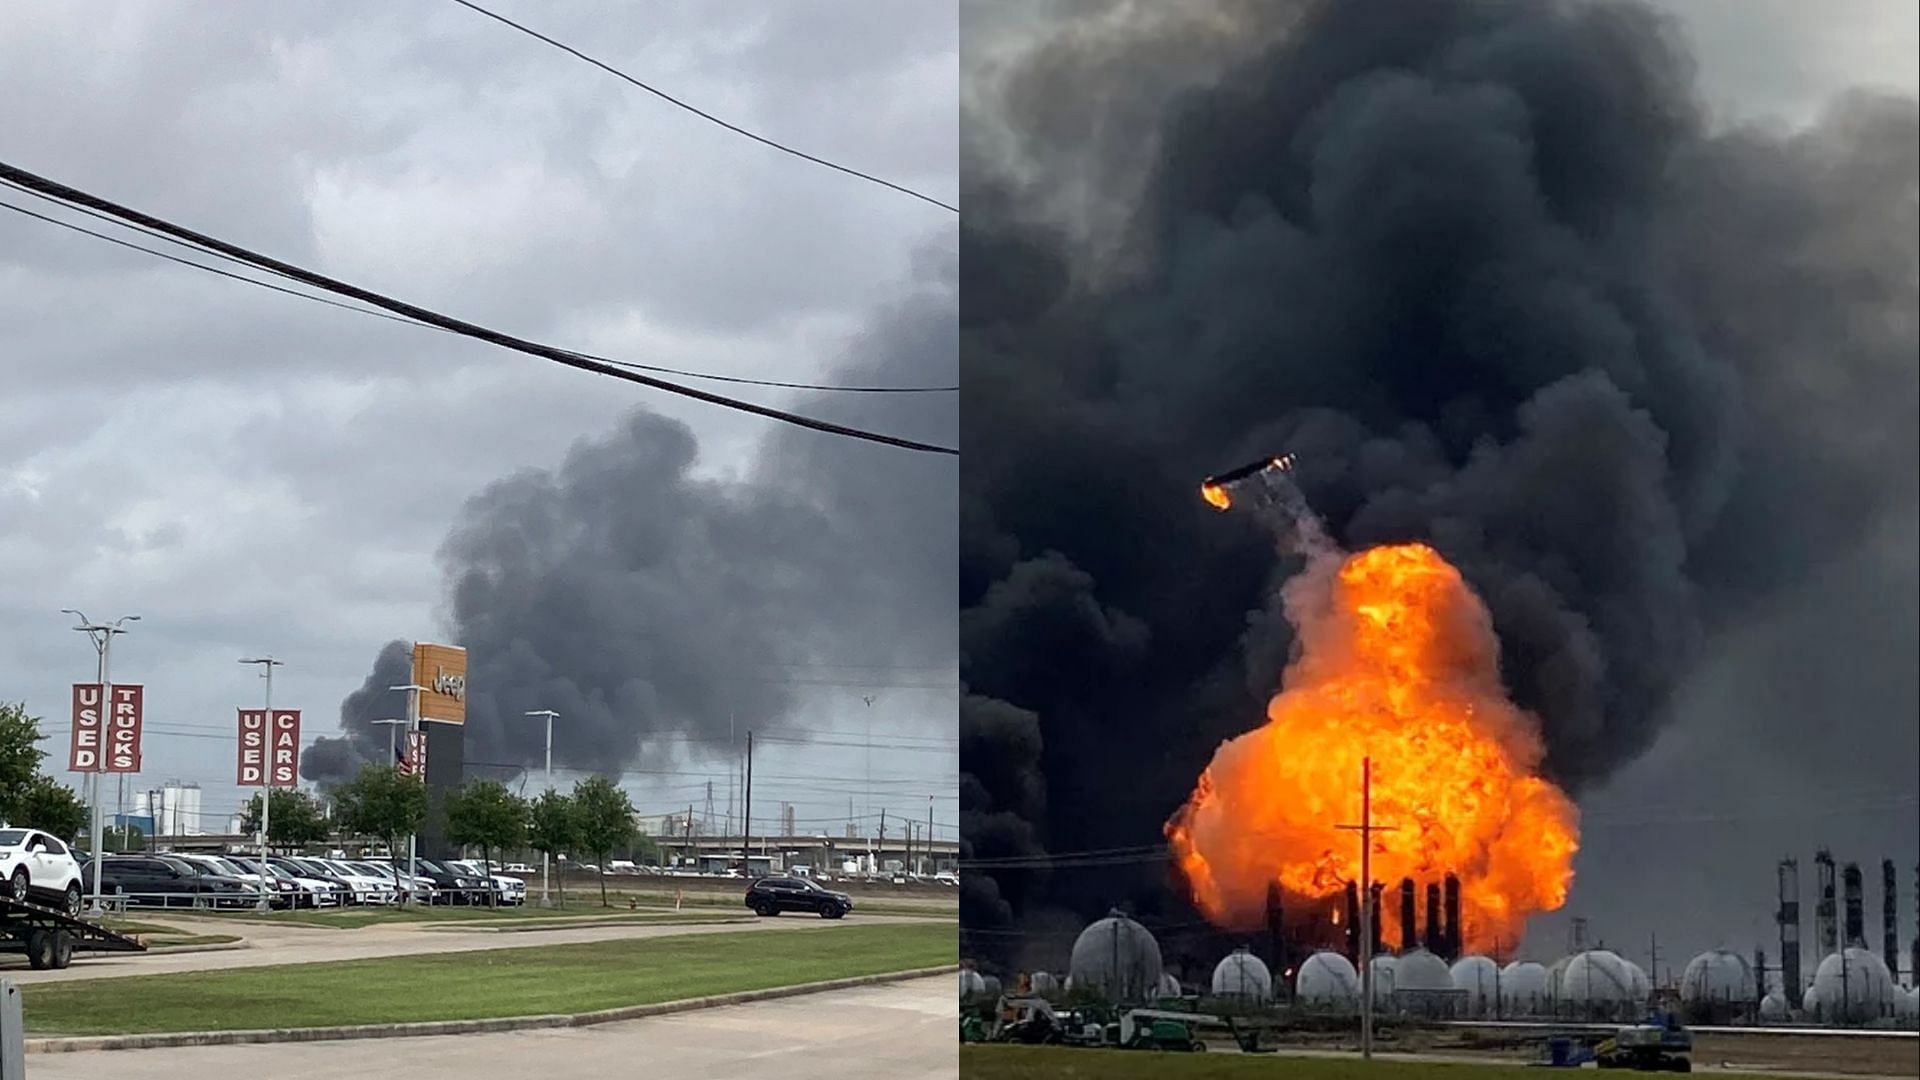 A chemical explosion occurred at a facility in Pasadena, Texas on Wednesday. (Image via Twitter/@Munxoner, Reuters)